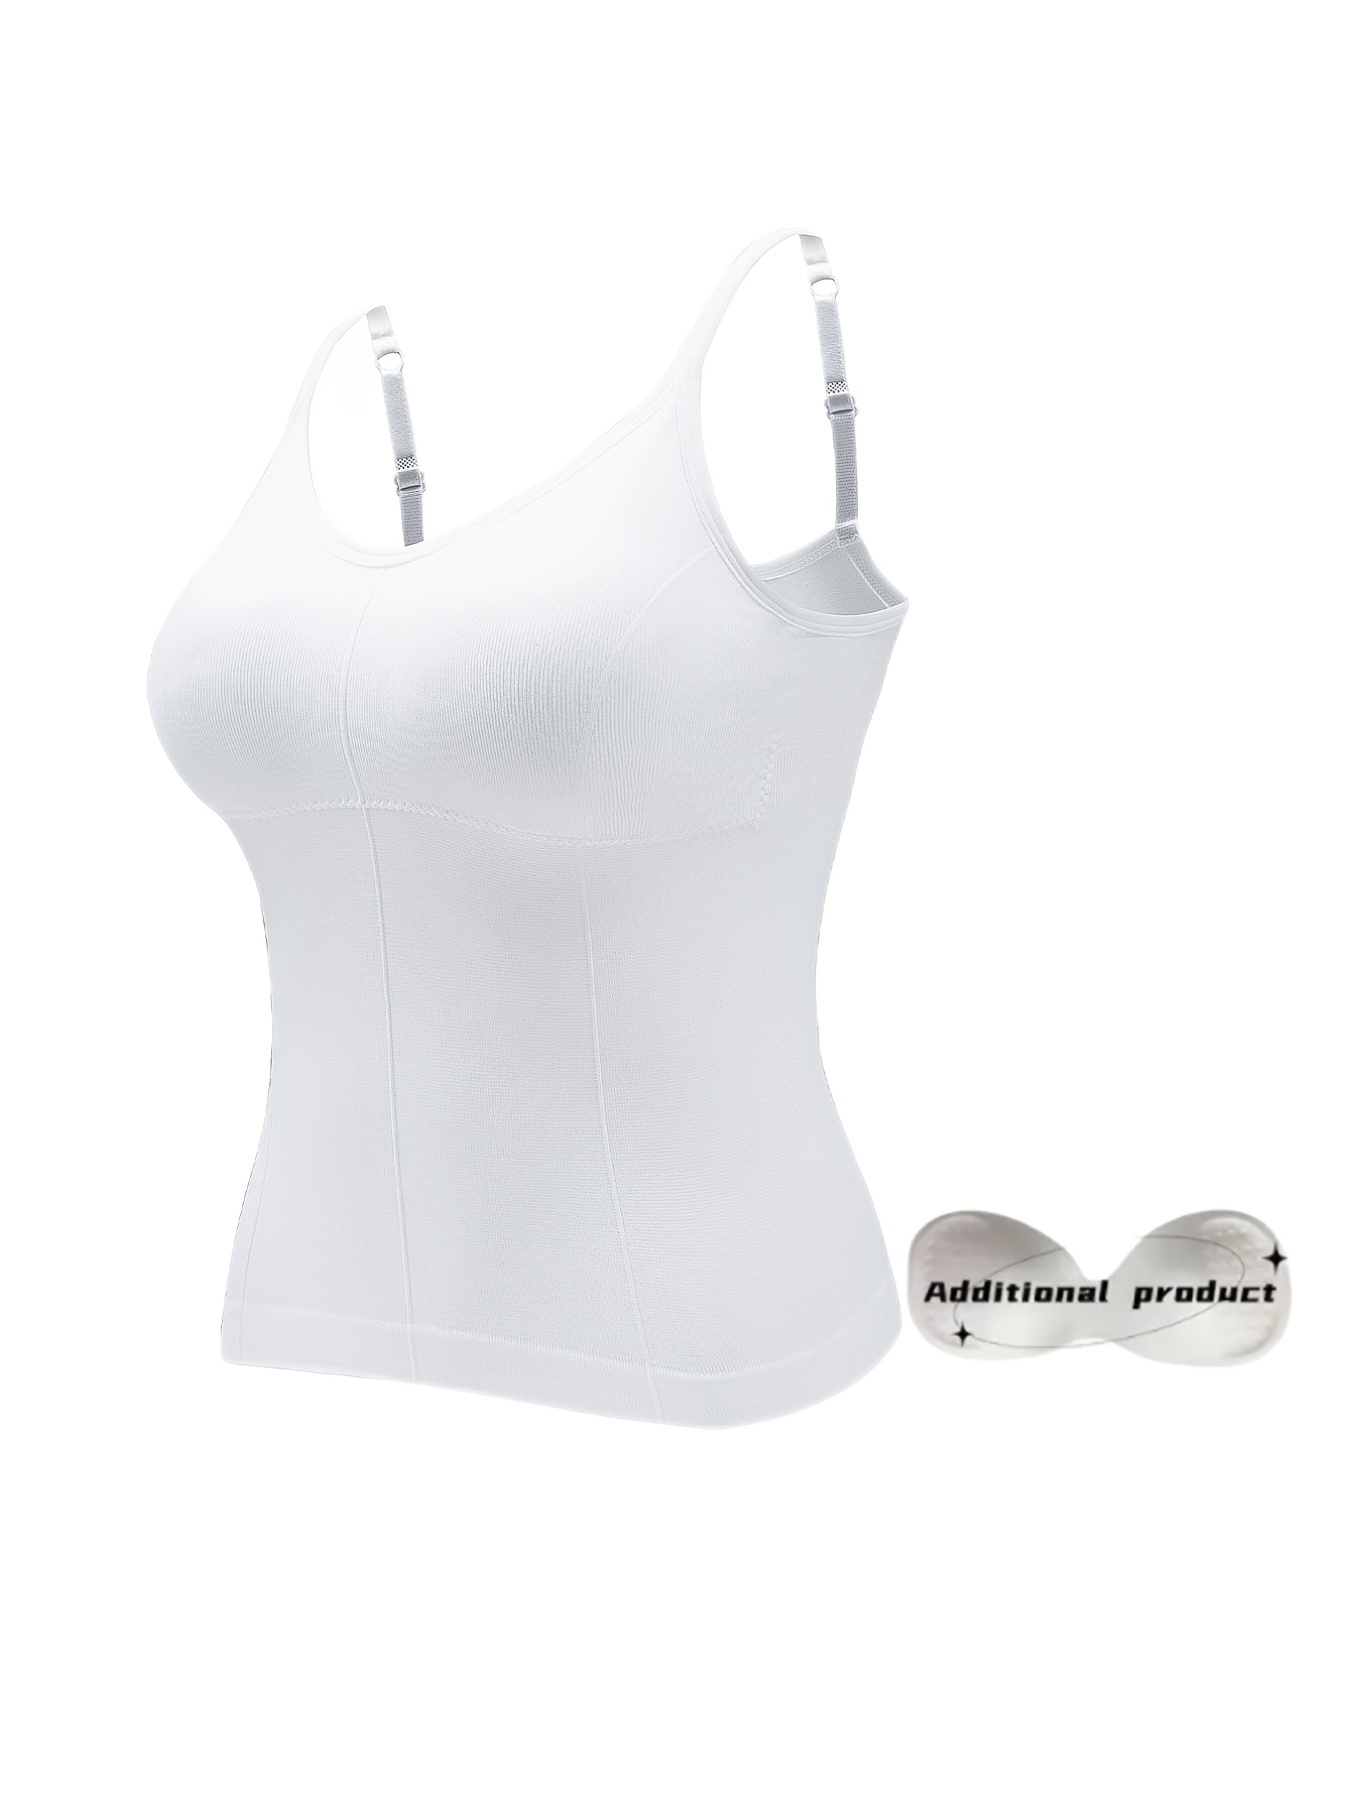 Women's Simple Solid Color Comfortable Body Sculpting Adjustable Strap Top  Built In Bra Tank Top White XL 